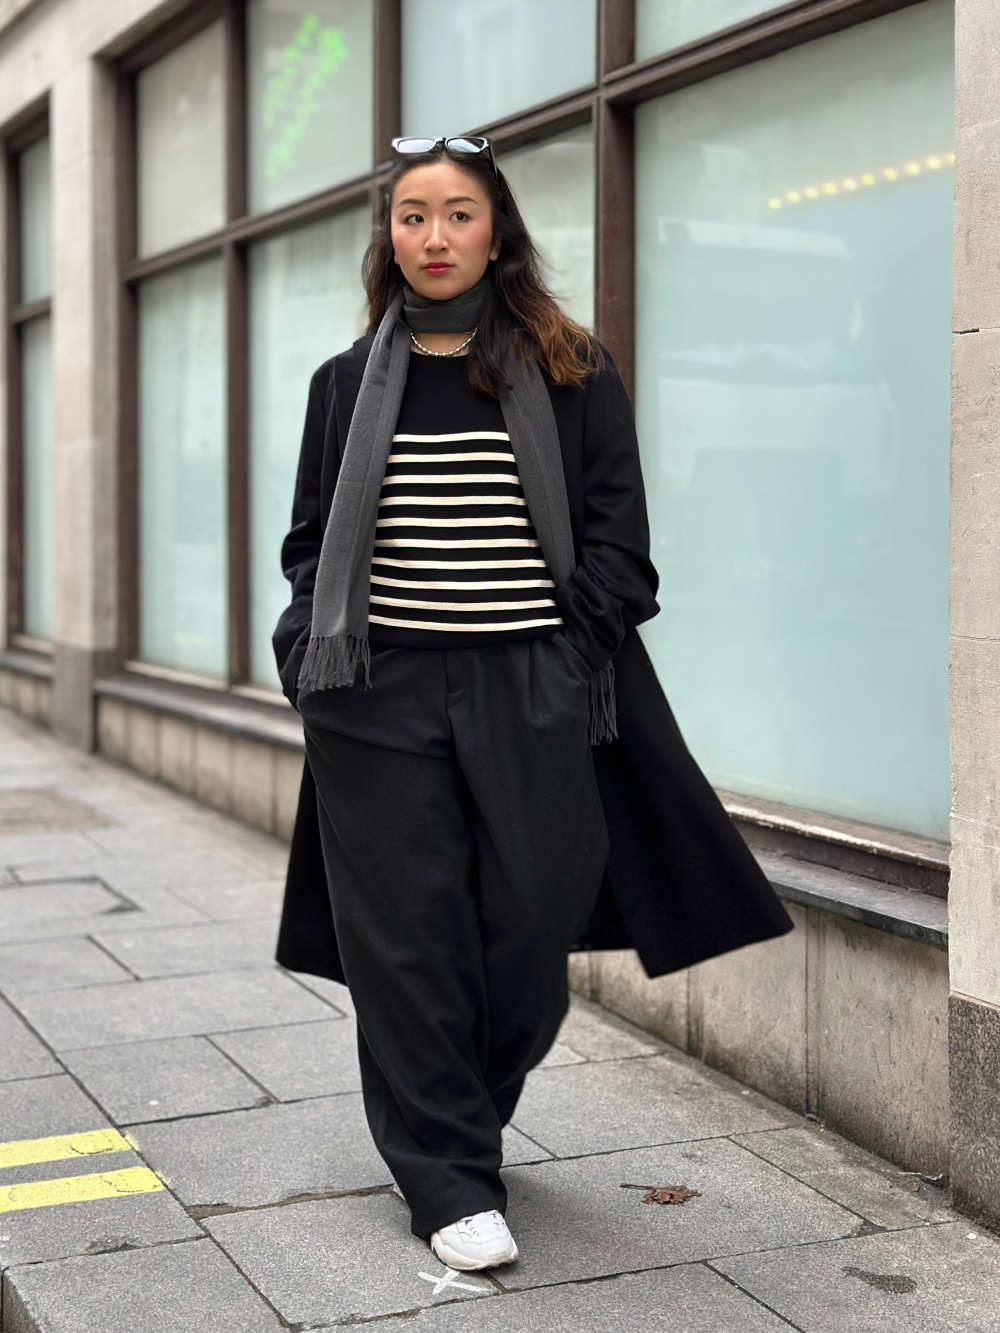 Check styling ideas for「Brushed Jersey Pleated Wide Pants」